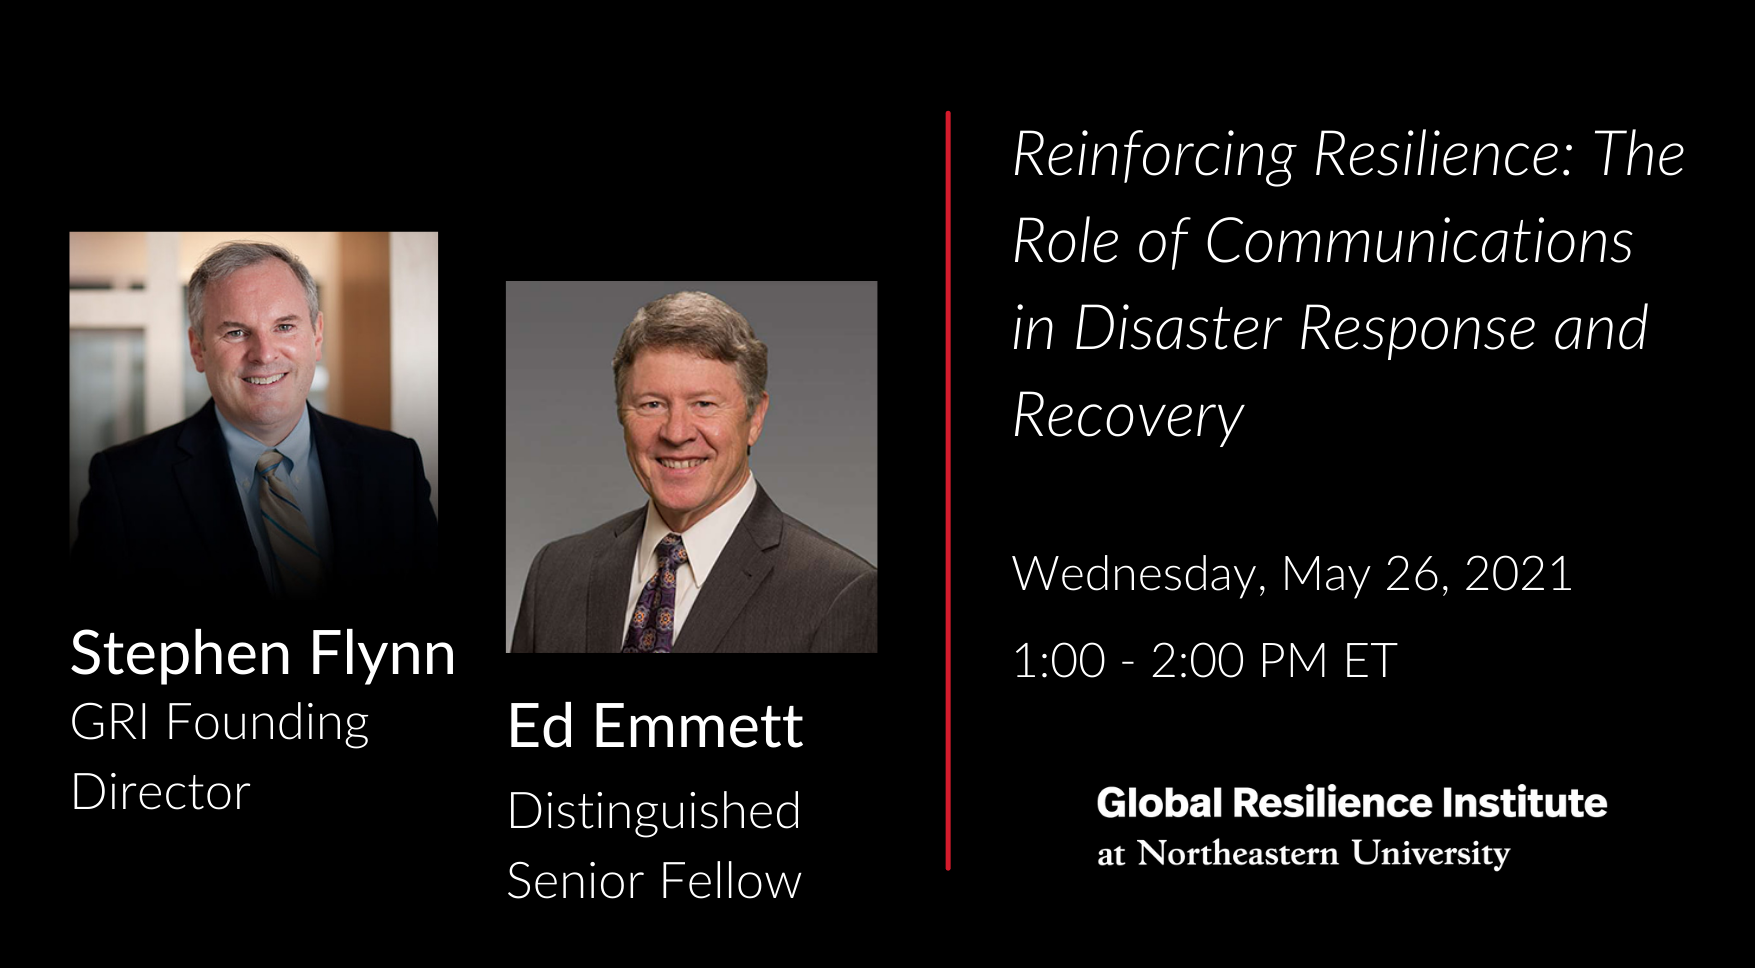 Reinforcing Resilience: The Role of Communications in Disaster Response and Recovery